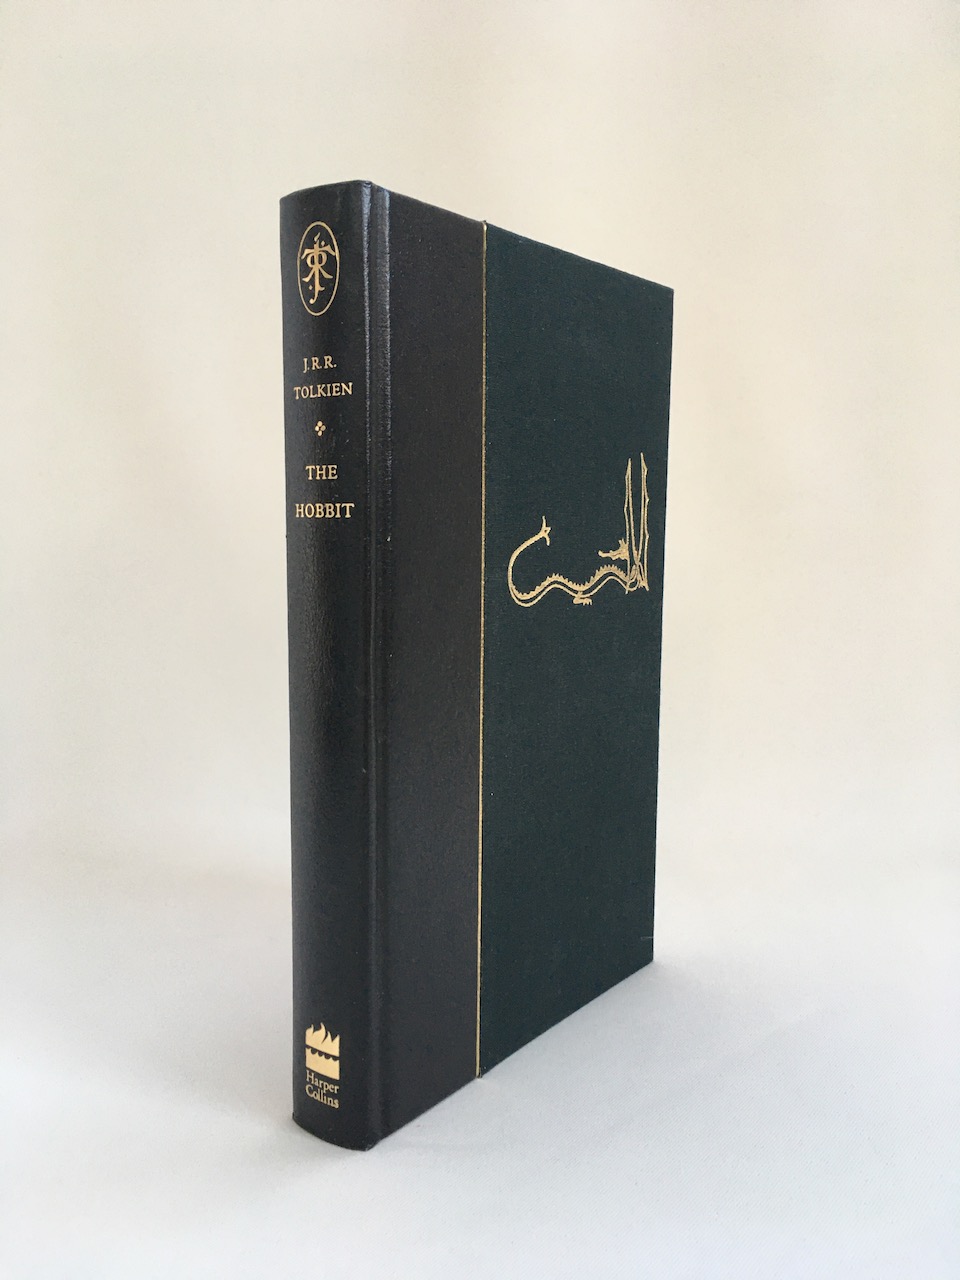  The Hobbit by J.R.R. Tolkien, 1999 Limited Edition, one of 2500 copies 13